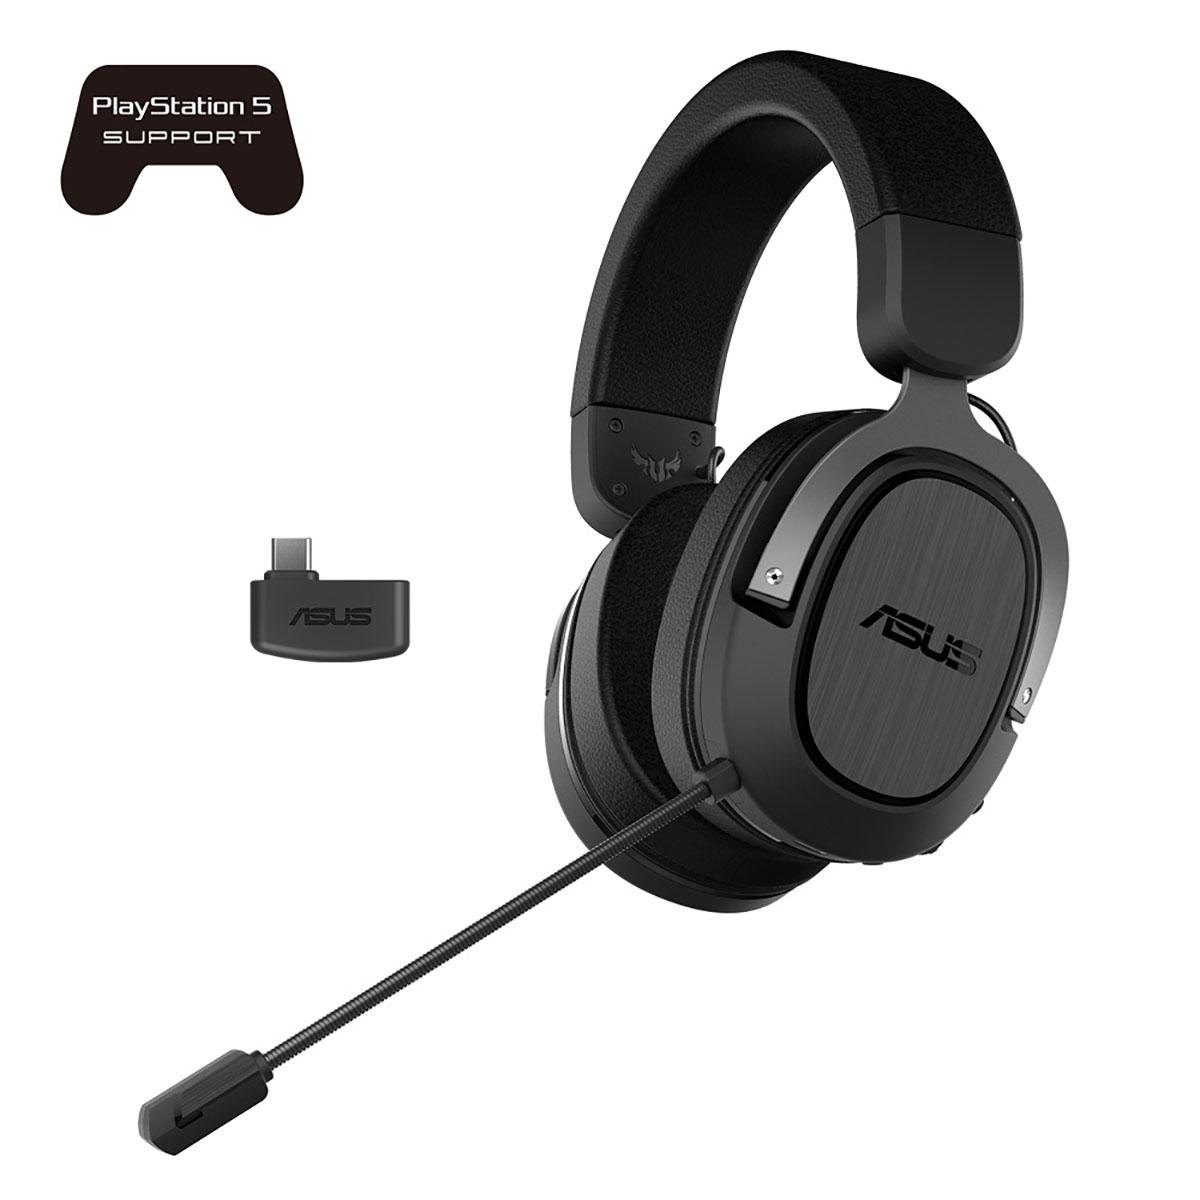 TUF GAMING H3 WIRELESS AUDIFONOS ASUS (TUF GAMING H3 WIRELESS) INALAMBRICOS USB-C,SONIDO 7.1,PC,MOVILES,PS5,SWITCH,NEGRO